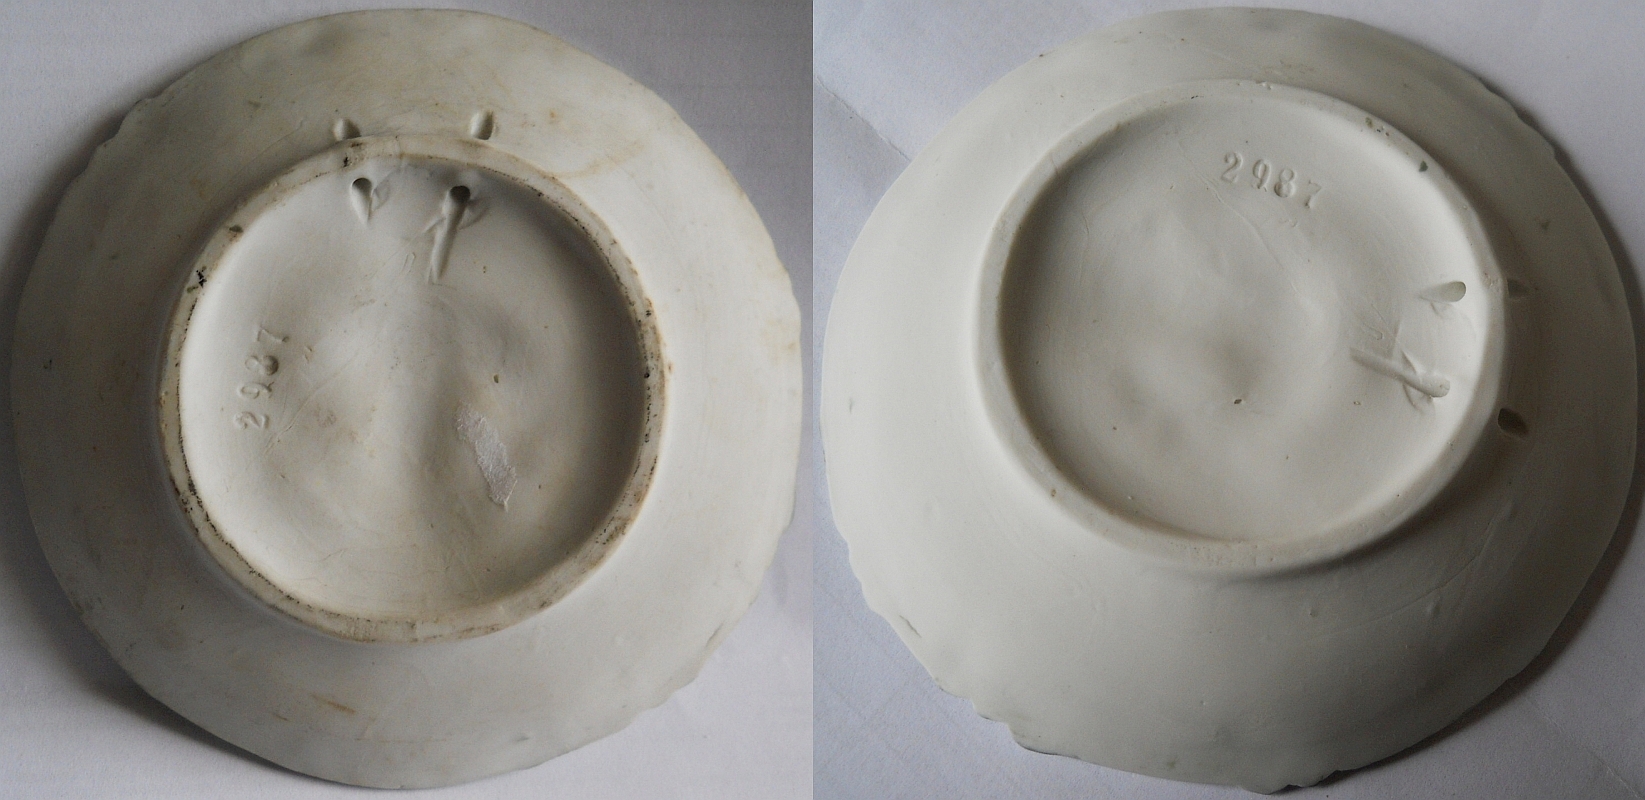 002-JasperWare-Mini-Plate-Plaque-Before-and-After-Clean.jpg